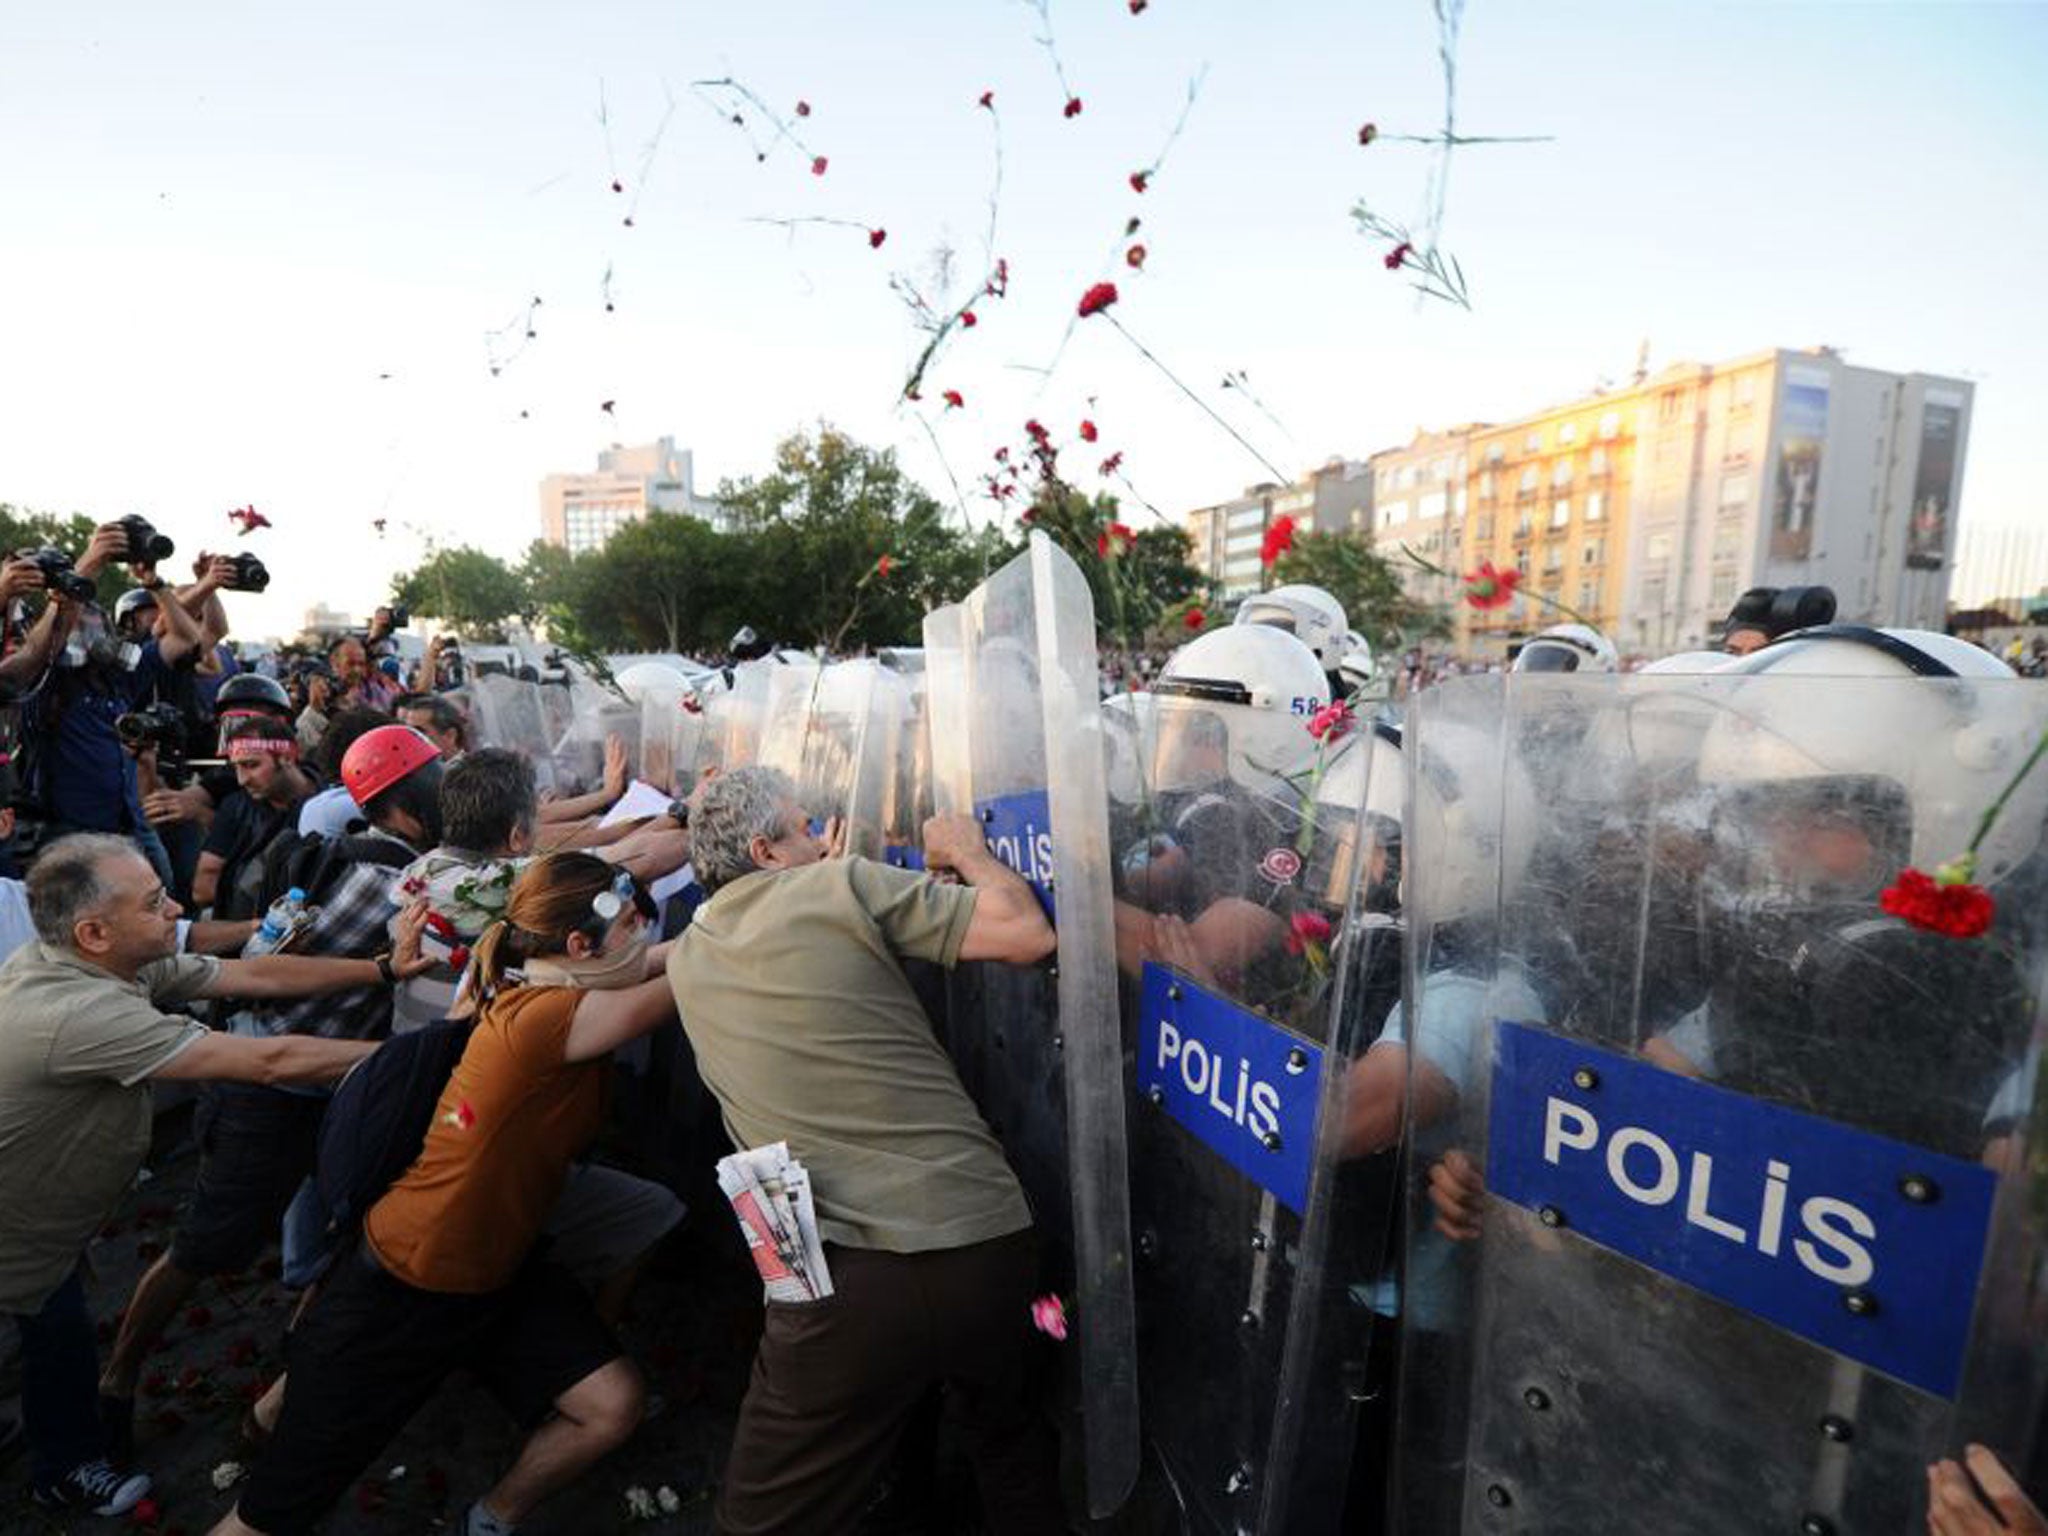 Protesters shower police with blooms in Taksim Square yesterday